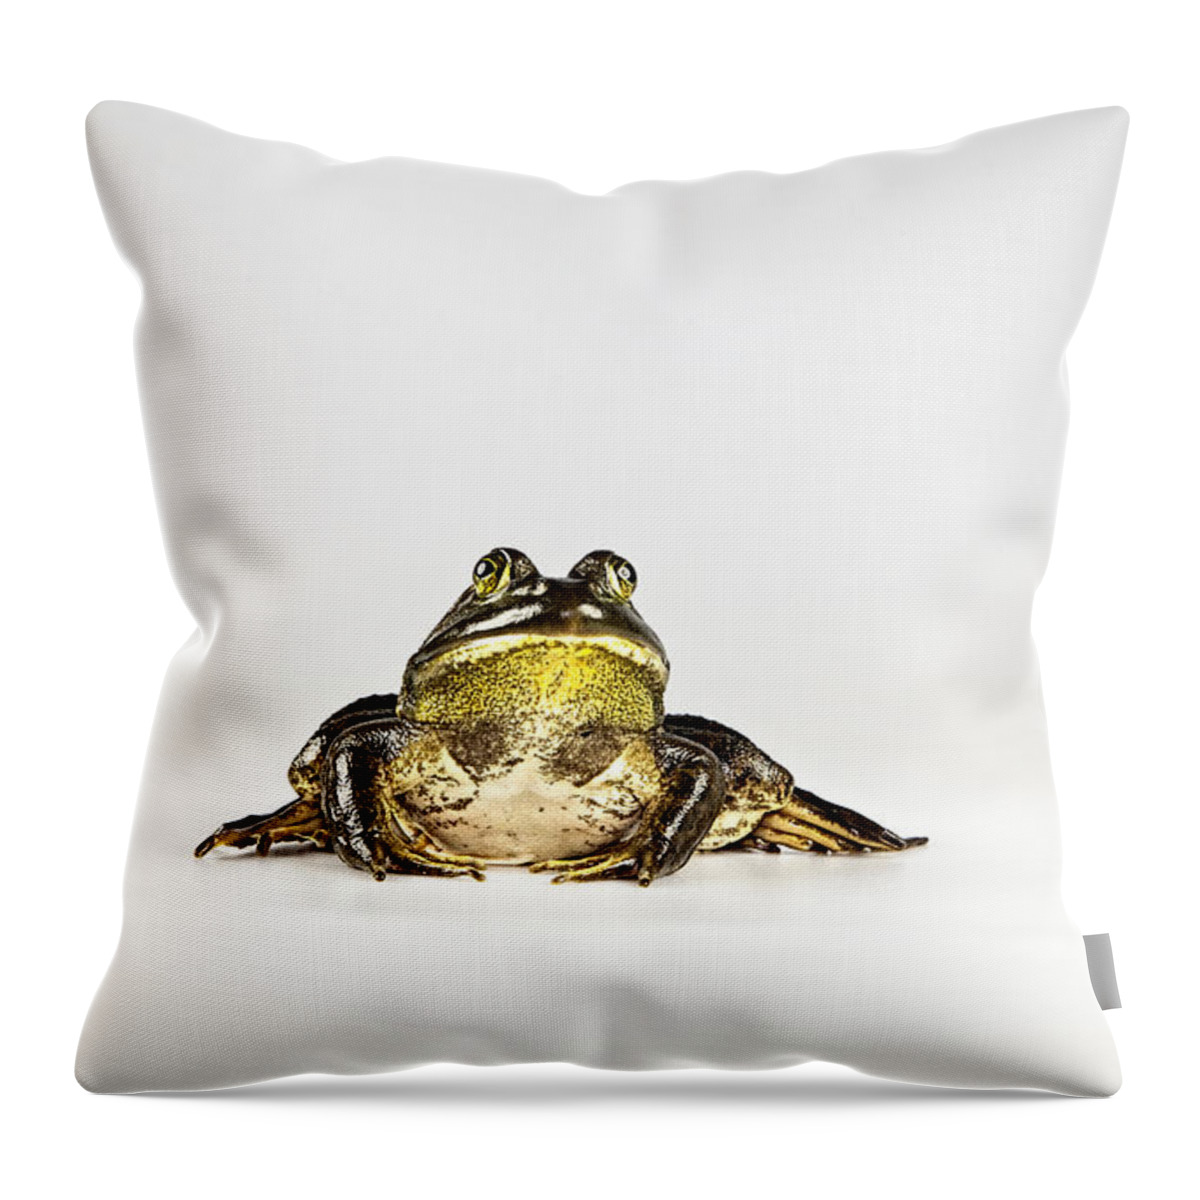 Bullfrog Throw Pillow featuring the photograph Bullfrog by John Crothers